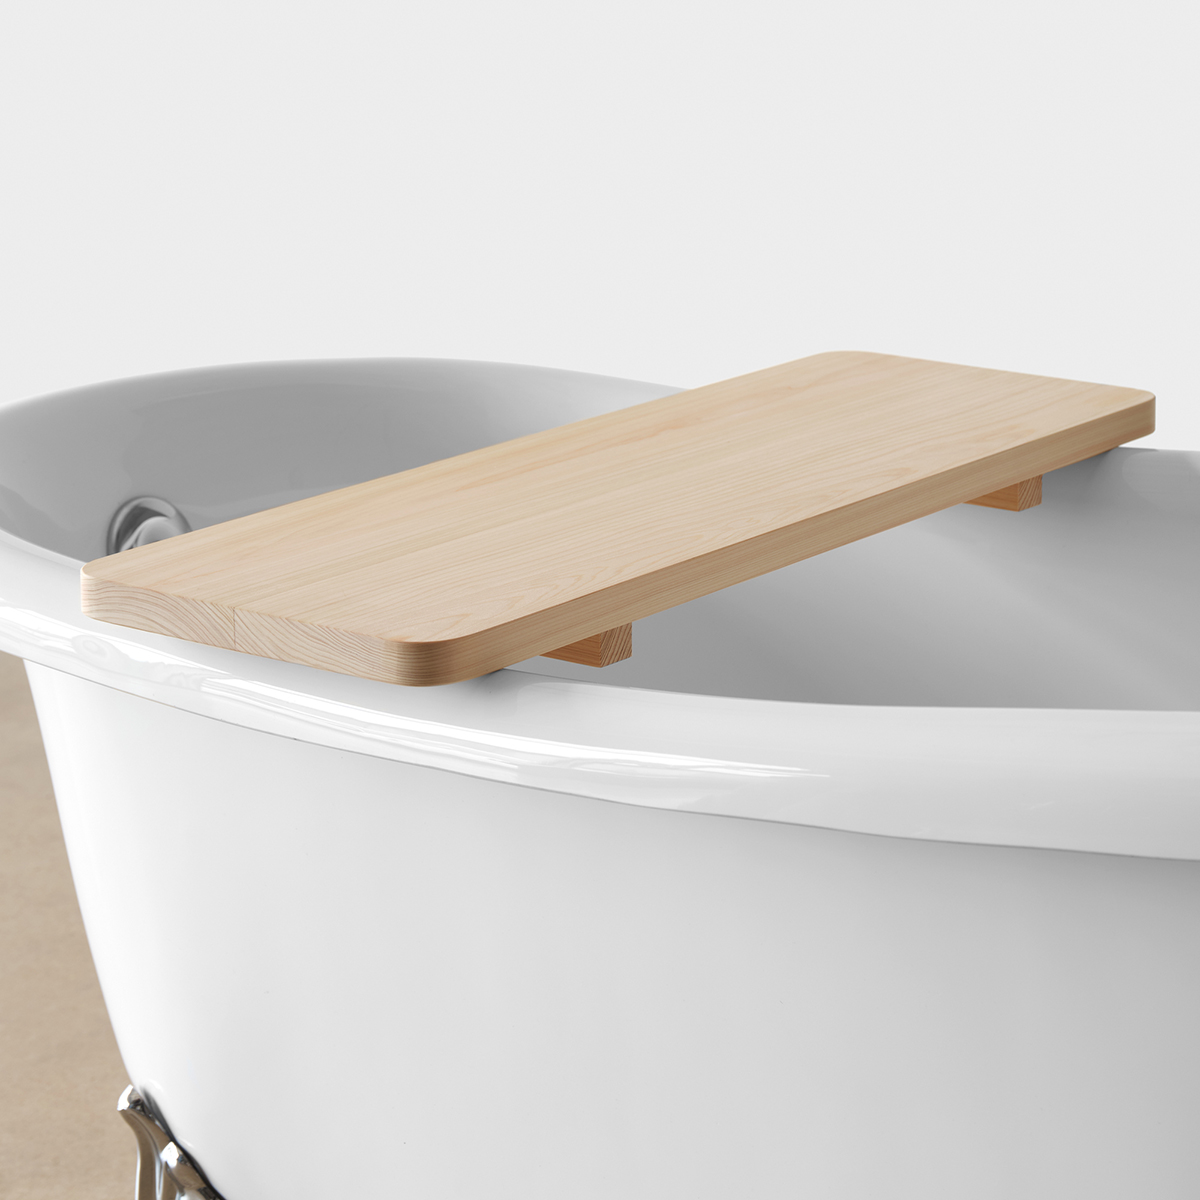 https://www.containerstore.com/catalogimages/499244/10096058-Hinoki_Wood_Bath_Caddy_1-ve.jpg